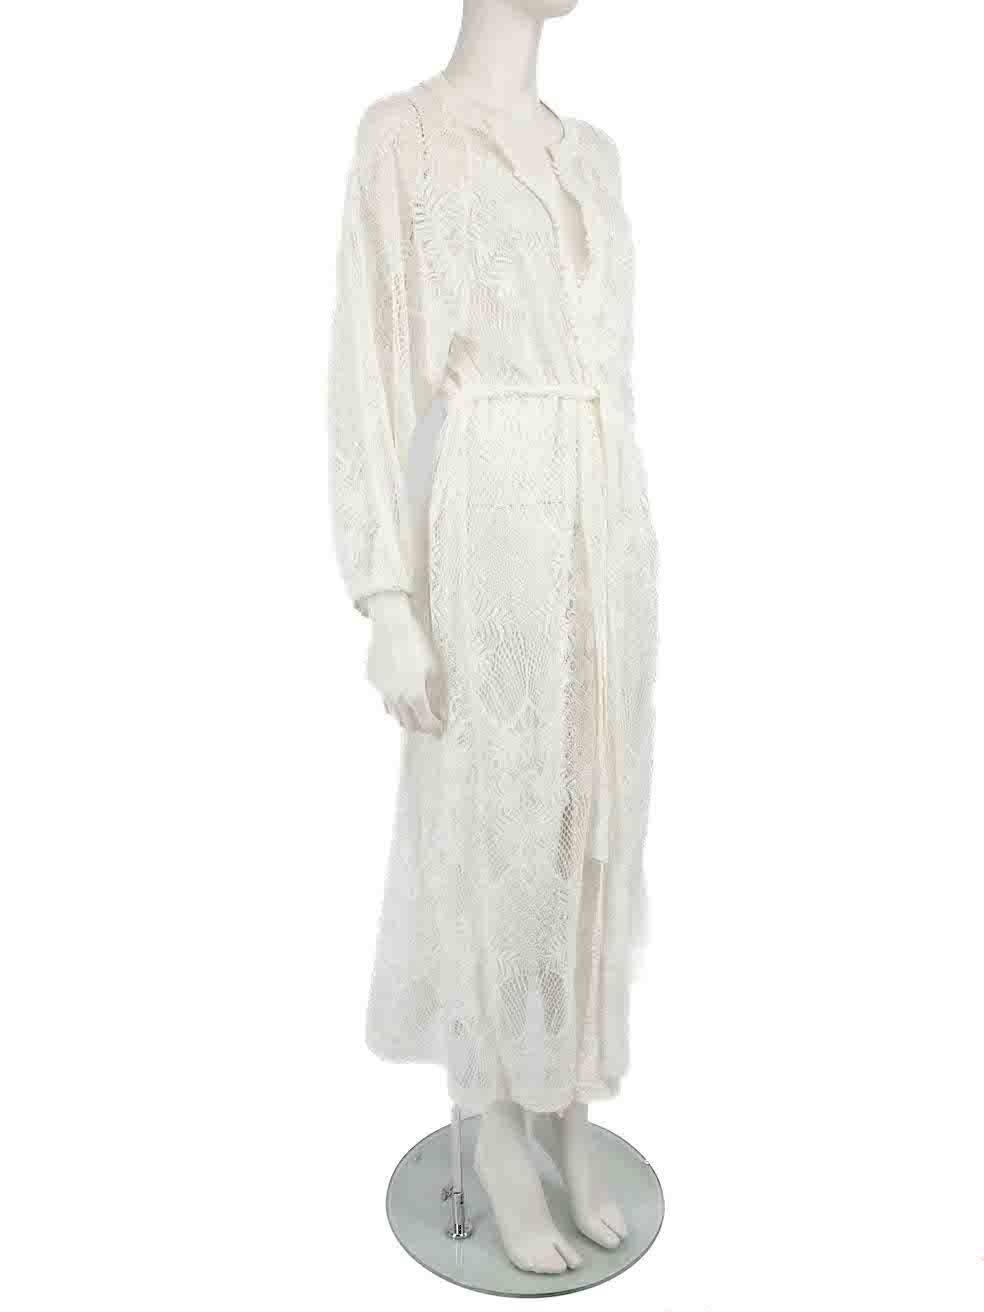 CONDITION is Very good. Minimal wear to beachwear is evident. Minimal wear to the fabric surface with some very light discolouration seen around the neckline on this used Melissa Odabash designer resale item.
 
 Details
 White
 Lace
 Beach cover up
